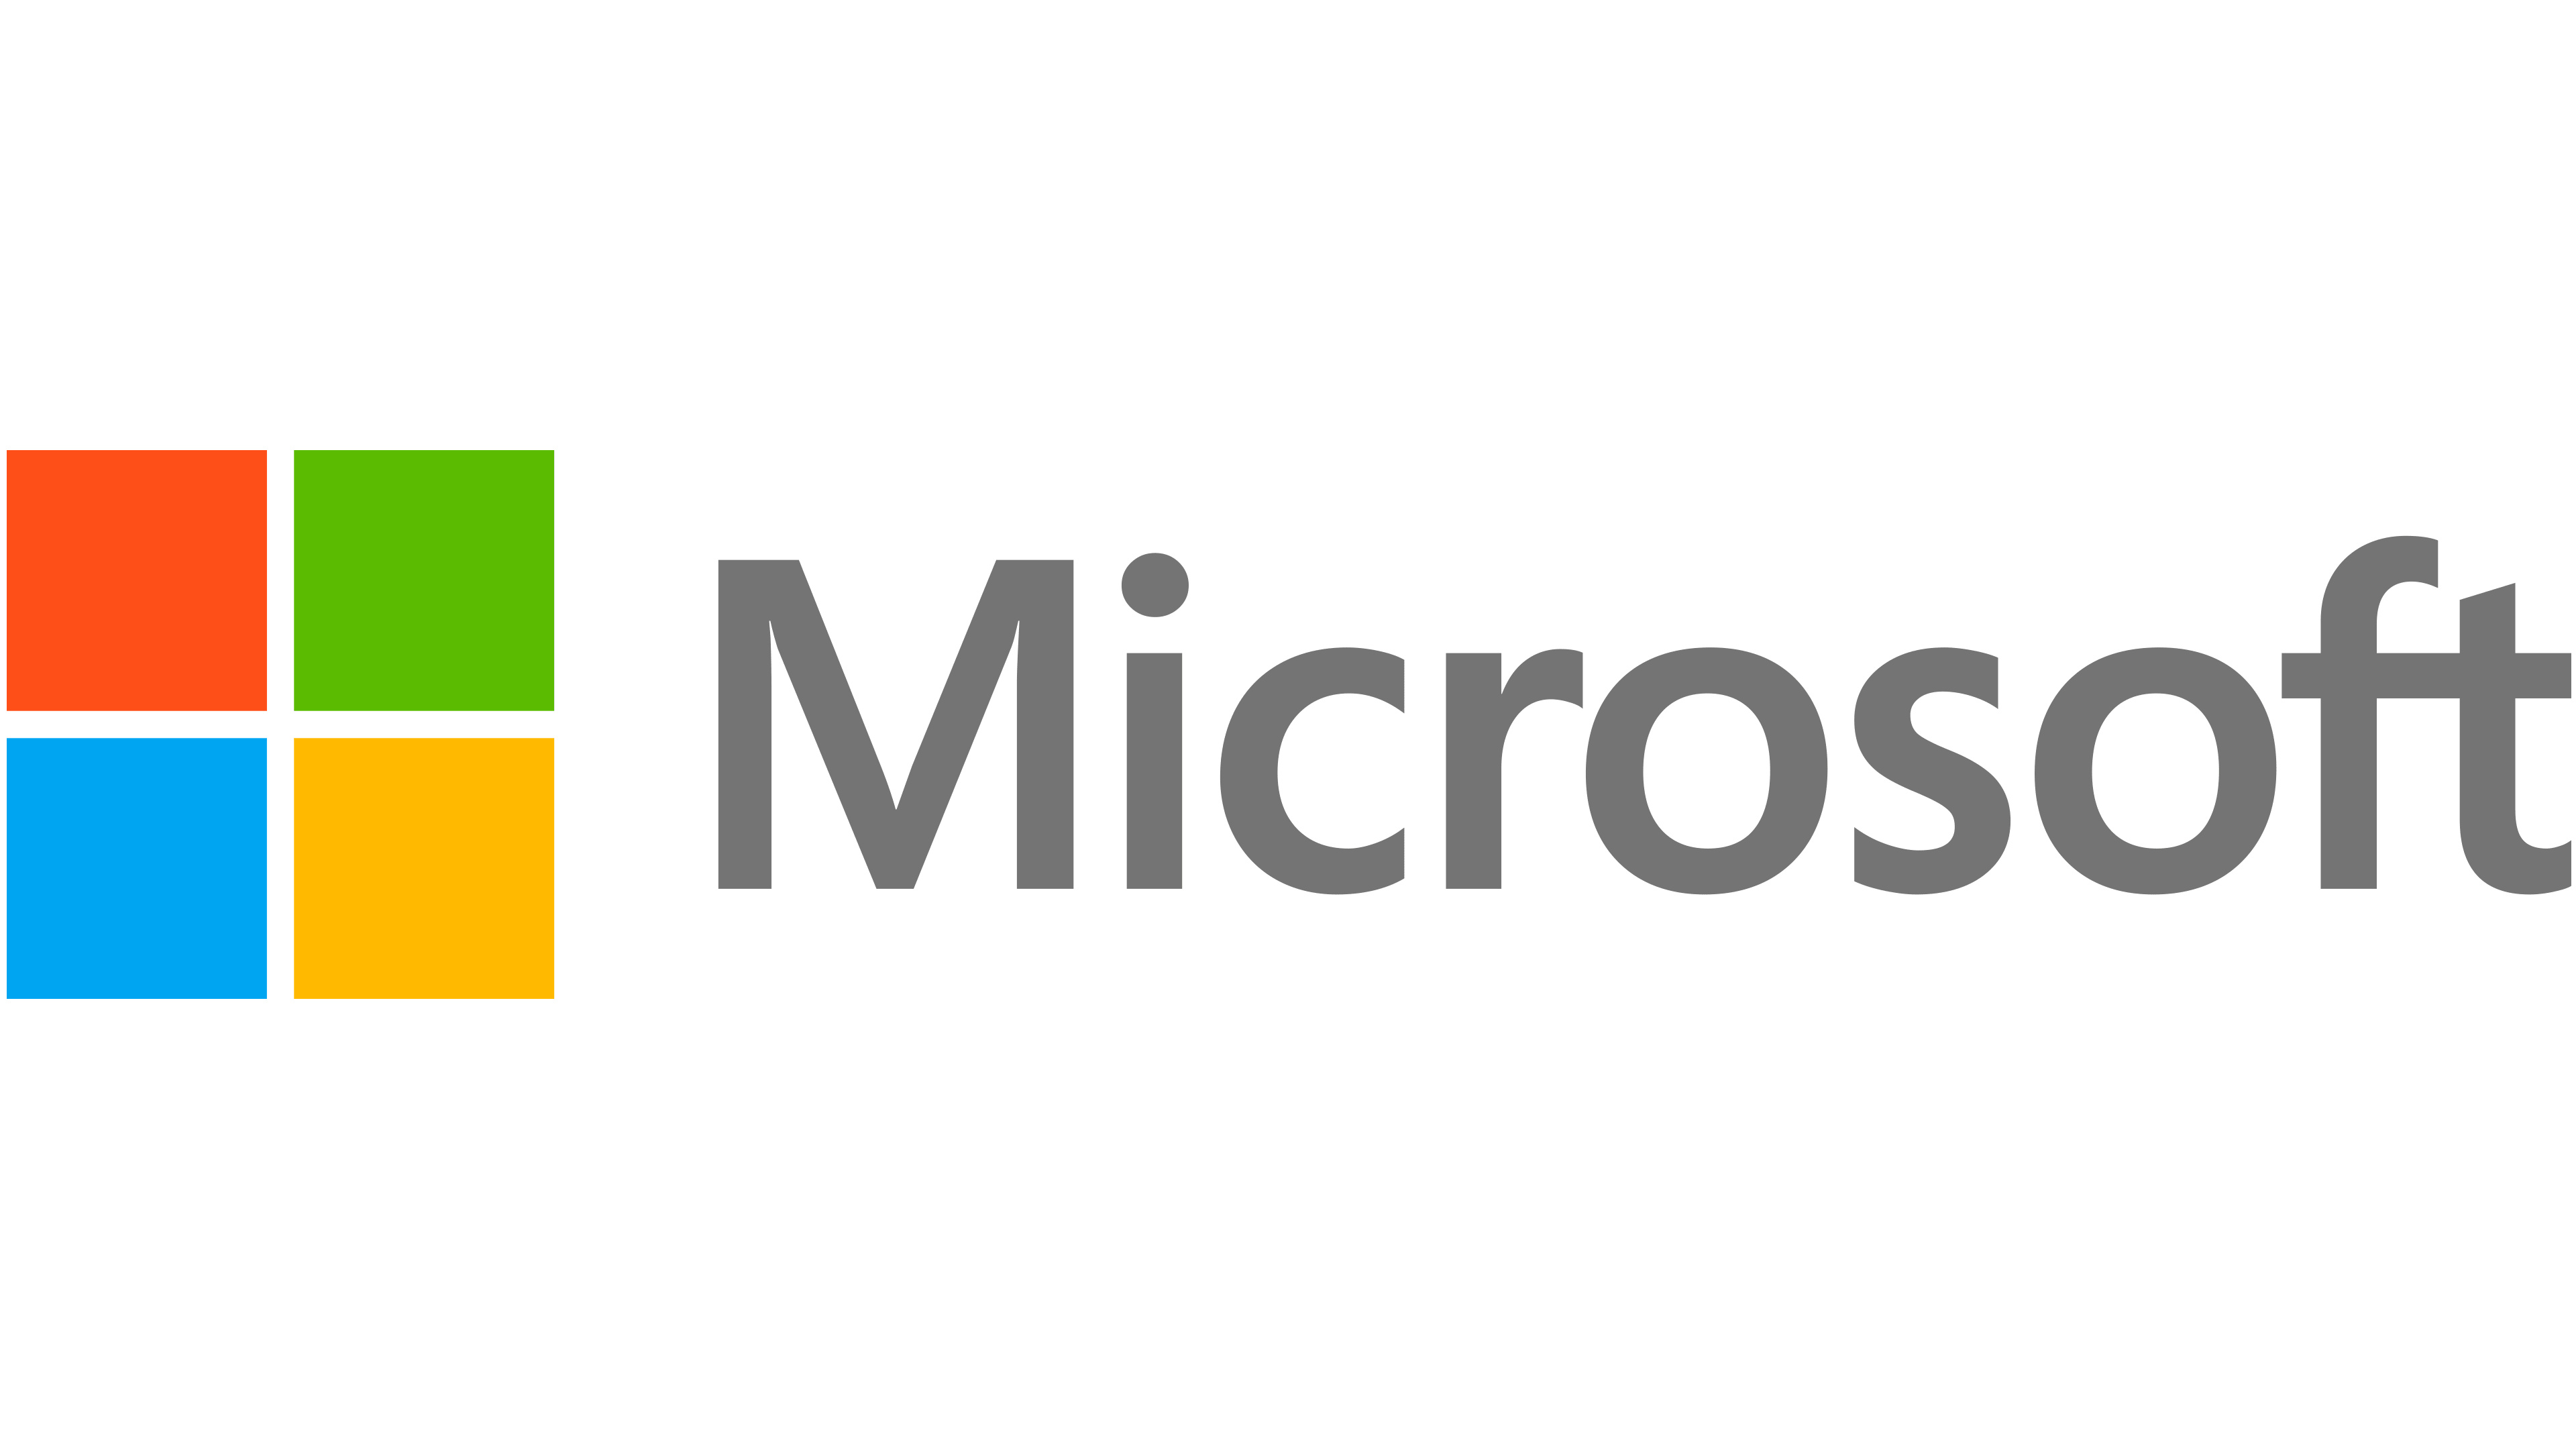 Microsoft: Office 365, An American technology corporation, founded by Bill Gates and Paul Allen on April 4, 1975. 3840x2160 4K Wallpaper.